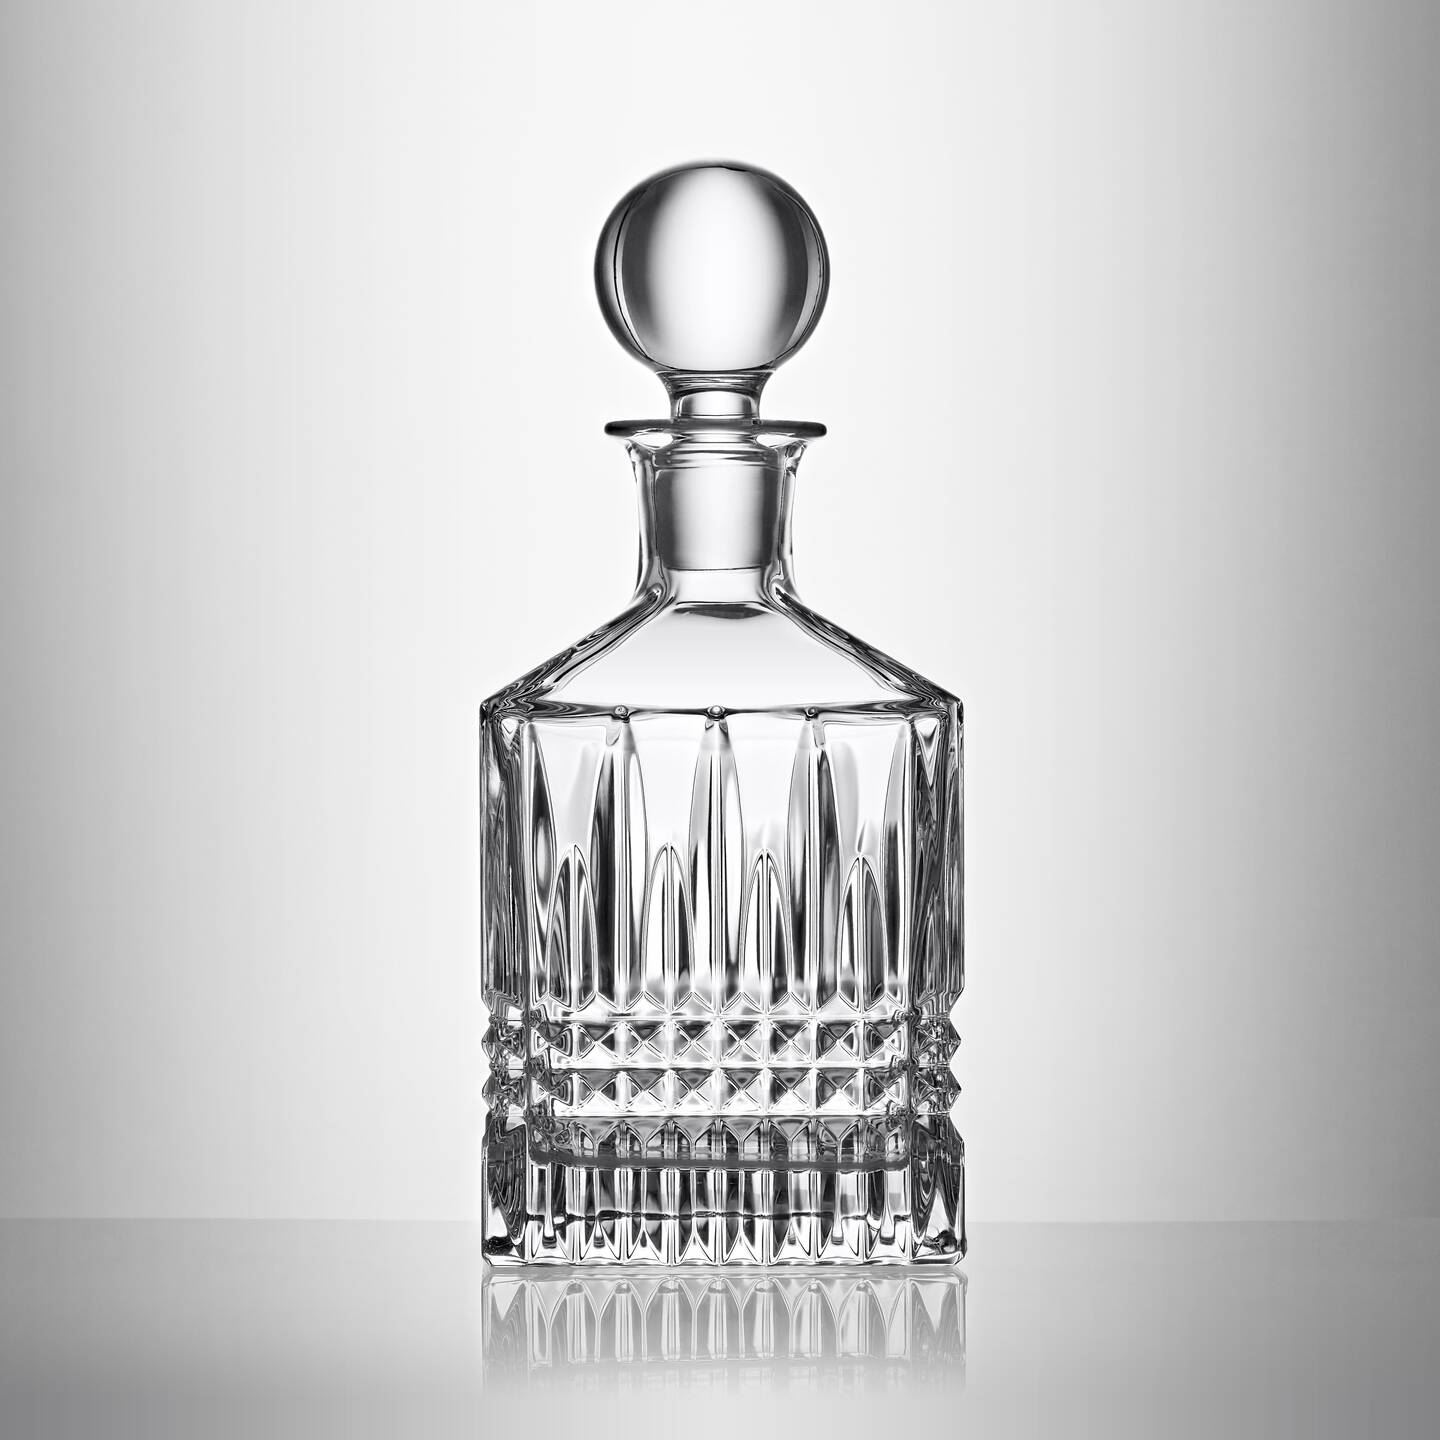 Waterford Waterford Lismore Diamond Square Decanter Image